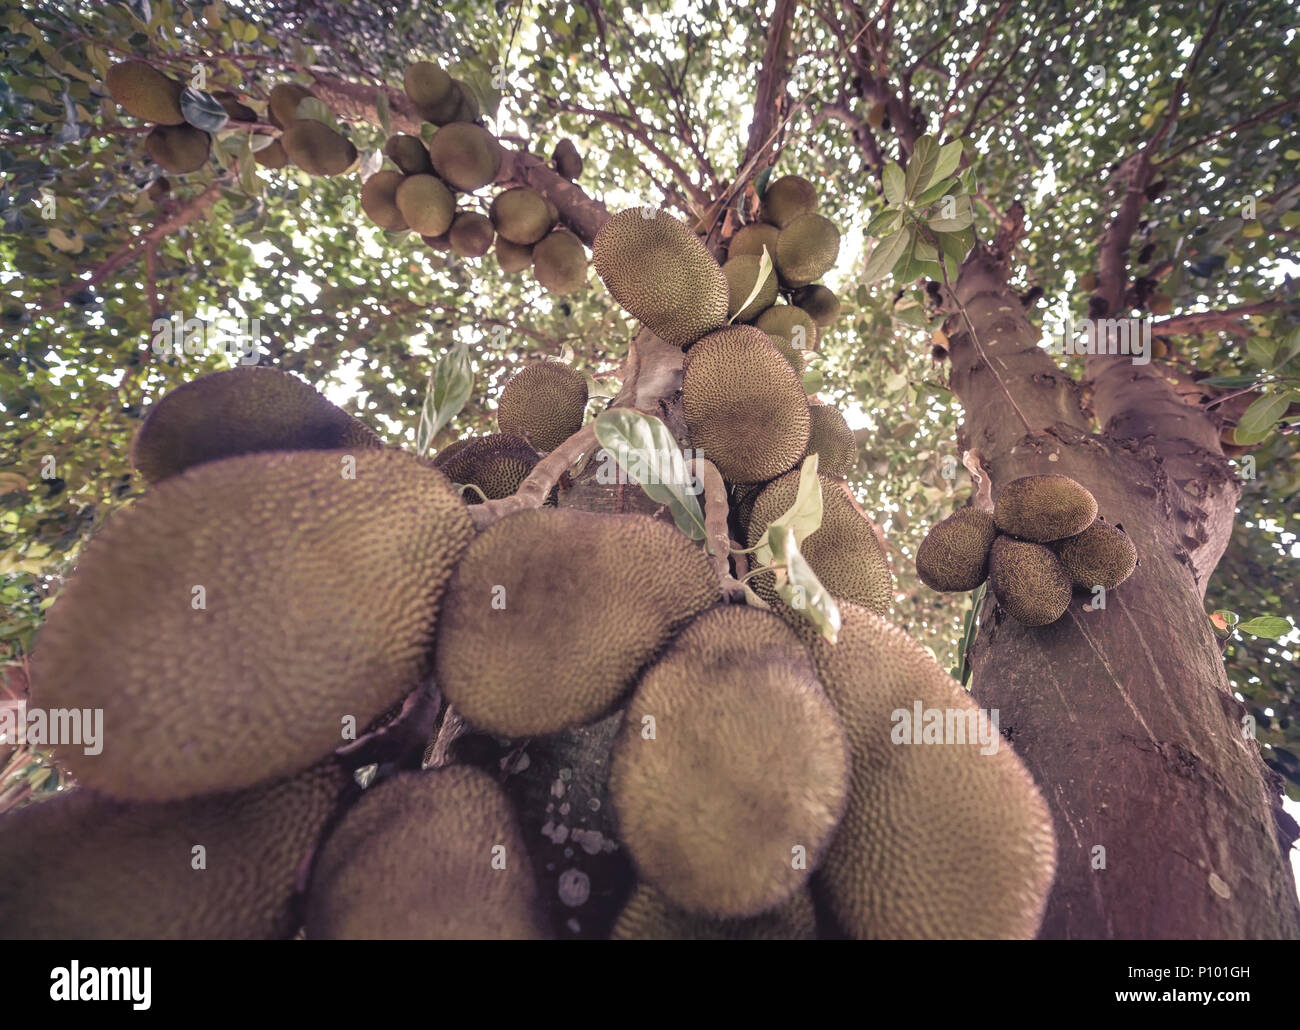 Jackfruit tree full of fruits. Image with depth of field and focus on center. Stock Photo